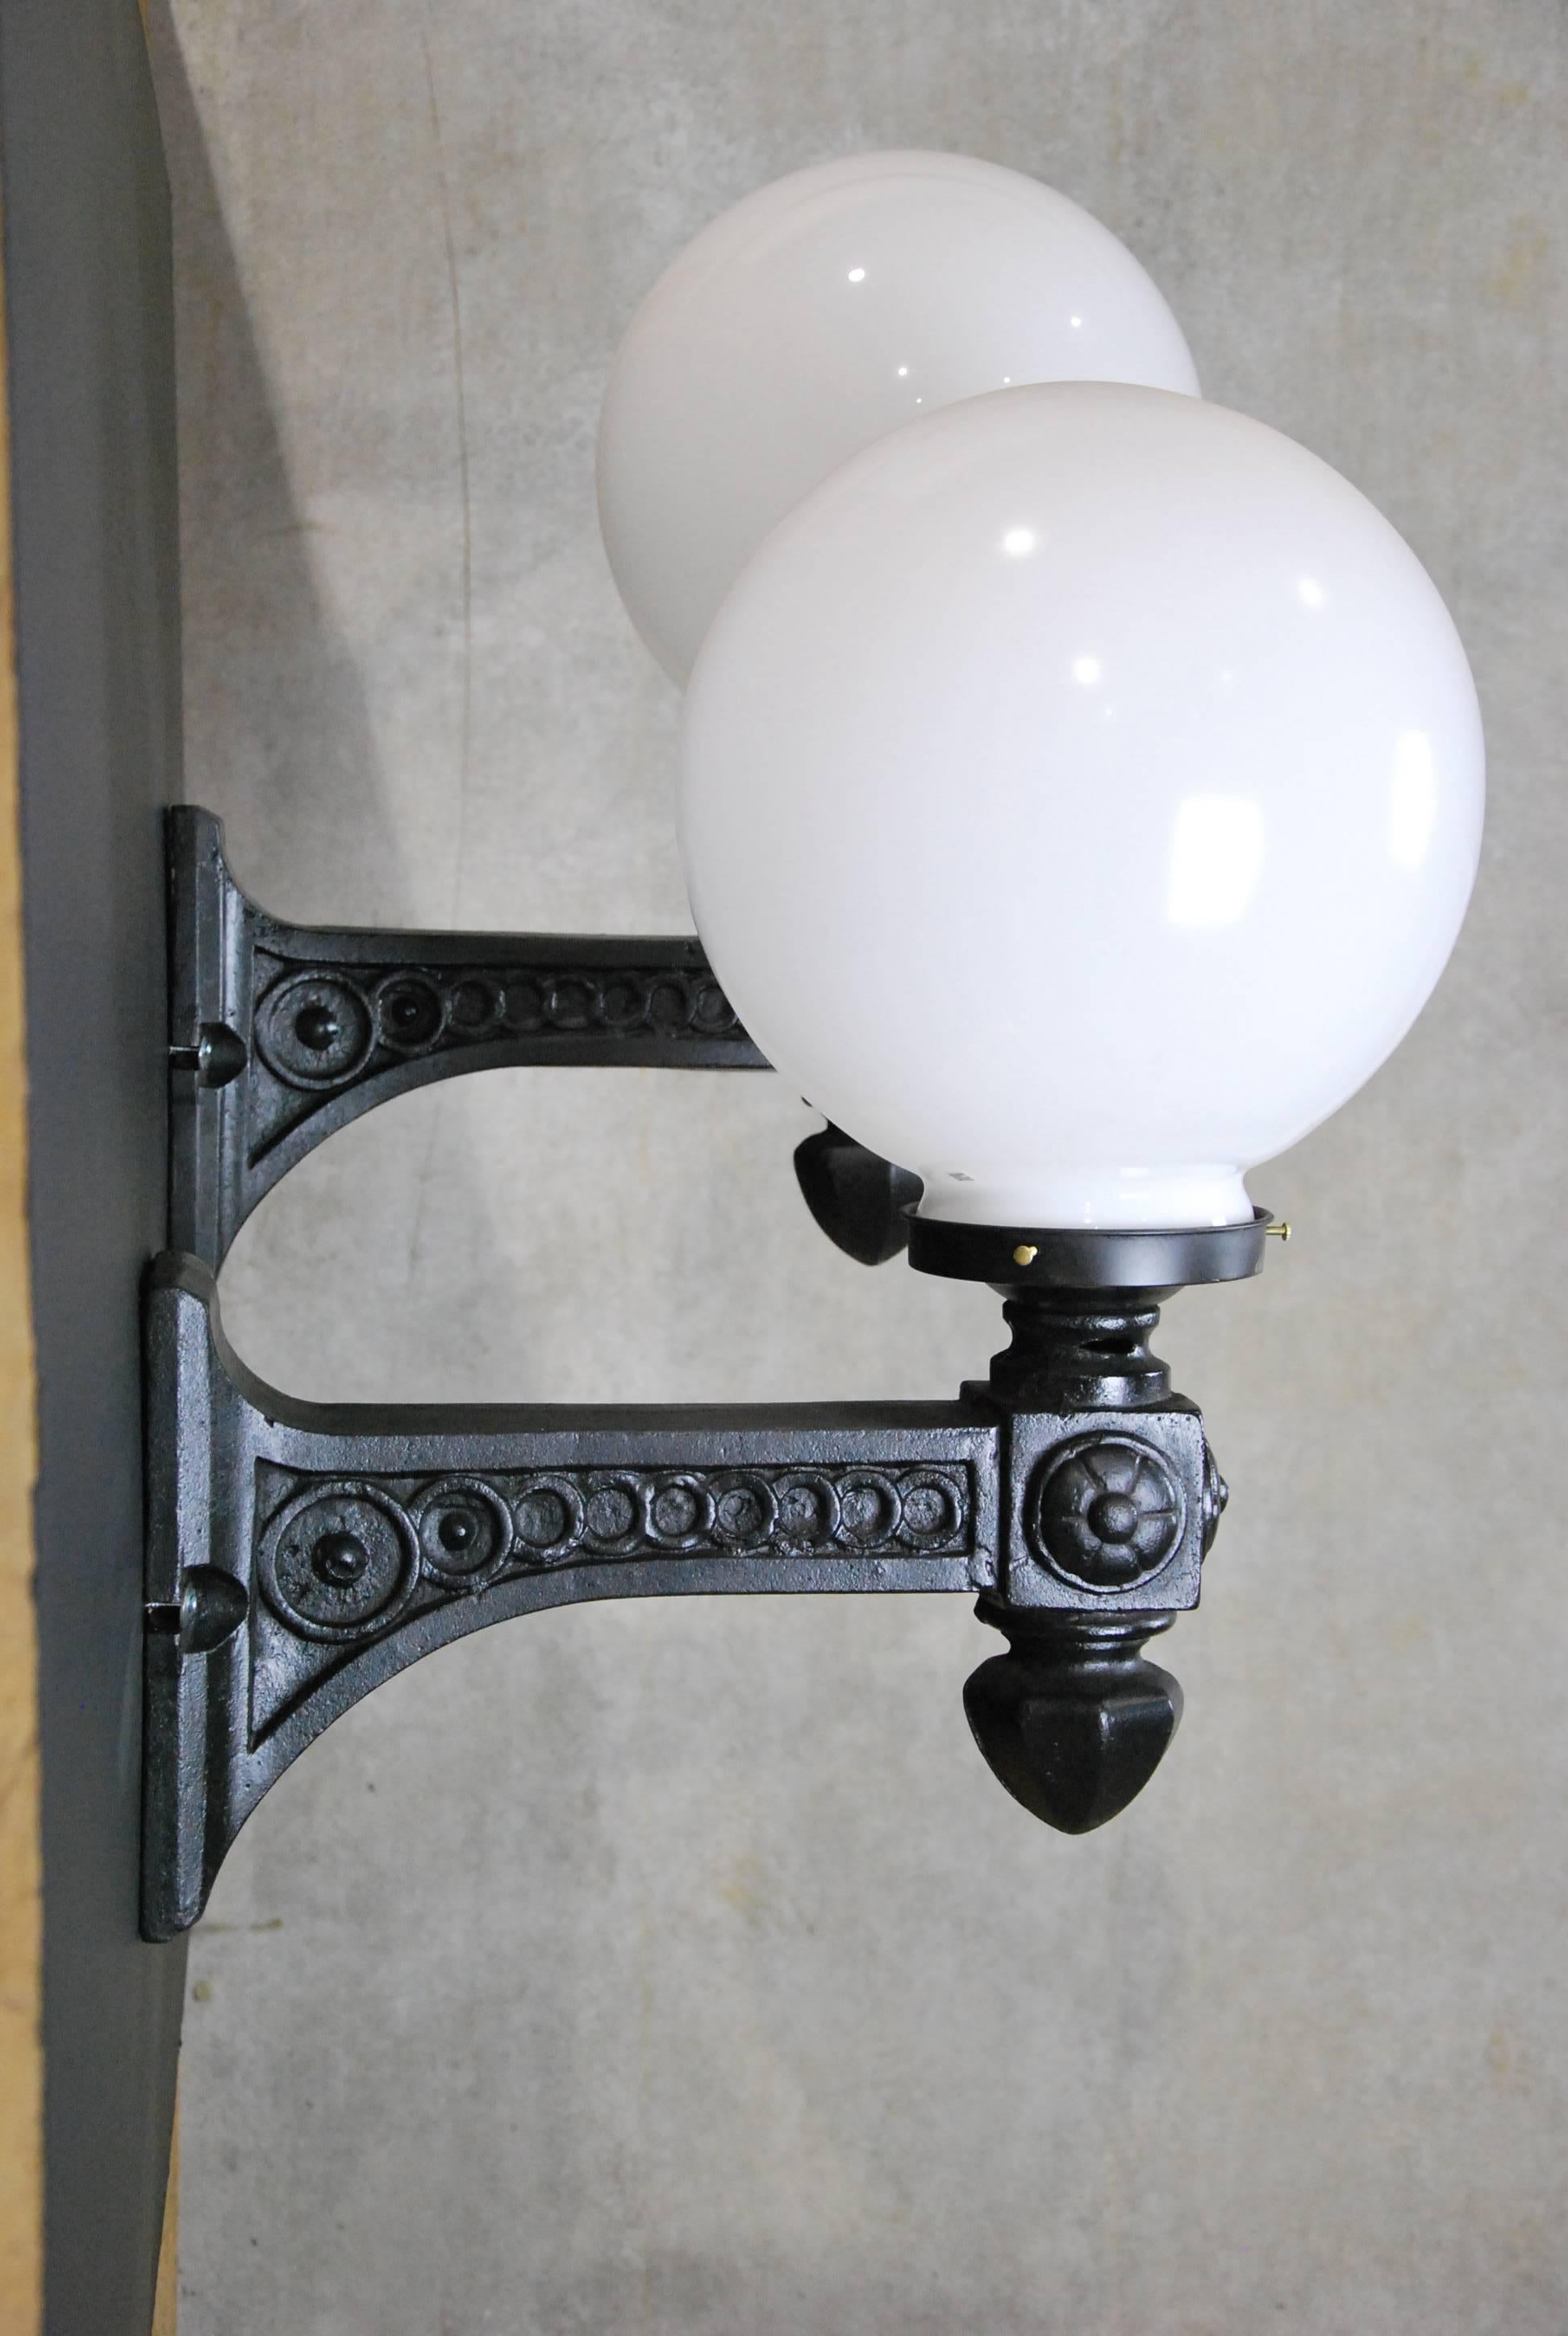 Pair of rewired and refurbished cast iron sconces, salvaged from a building in Chicago 20 years ago. Lights are CSA approved and ready to install. The 10-inch round glass globes are most likely not original but the fitter is a typical 6-inch, so